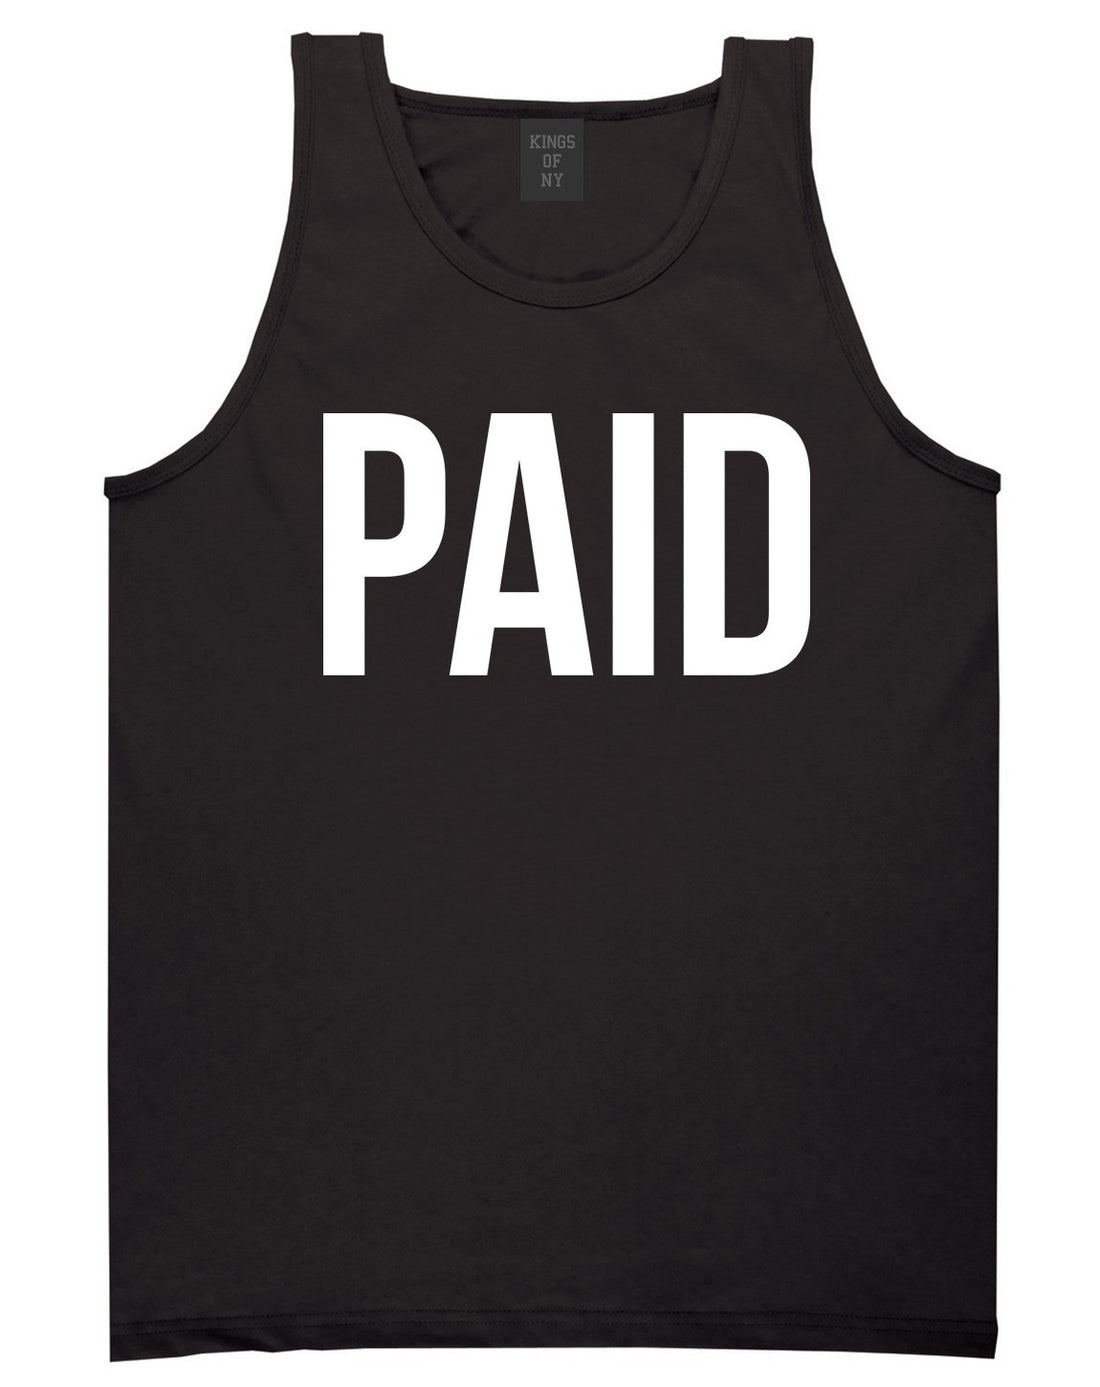 Kings Of NY Paid Tank Top in Black